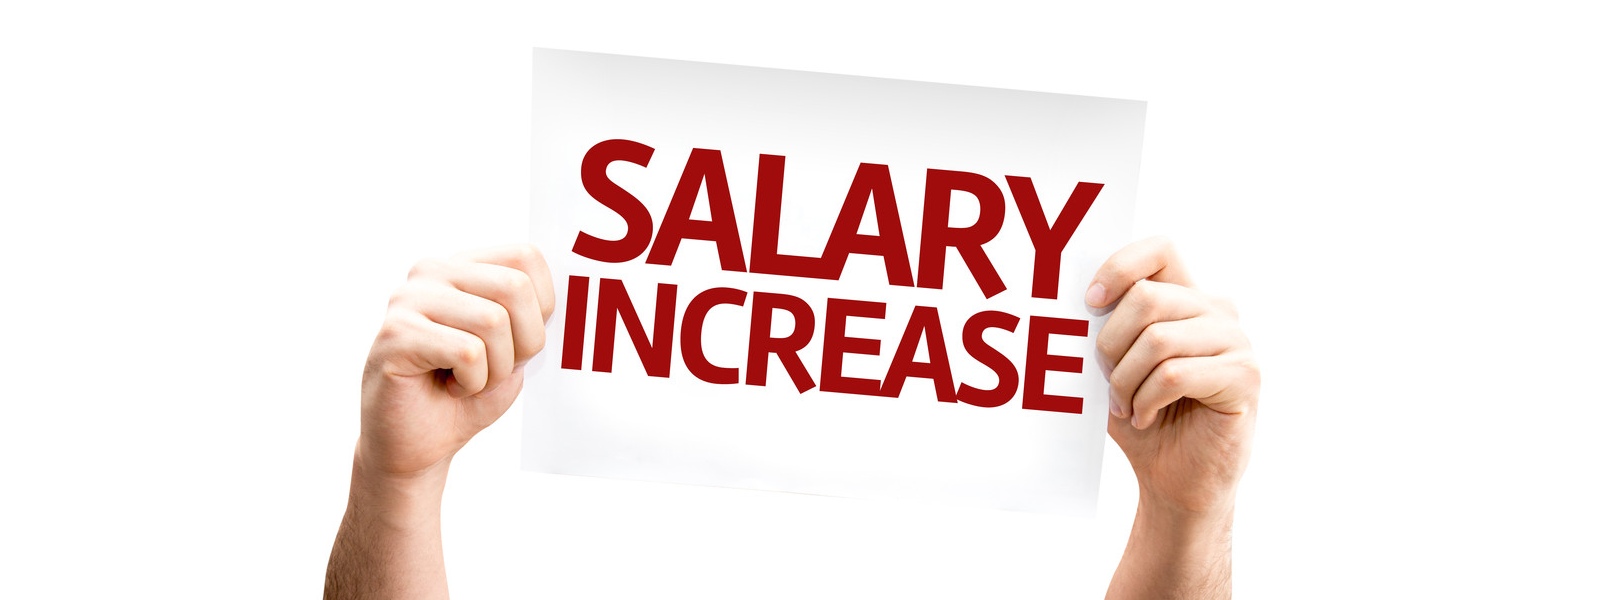 Public Sector TUs requesting for Rs. 10,000 salary increase